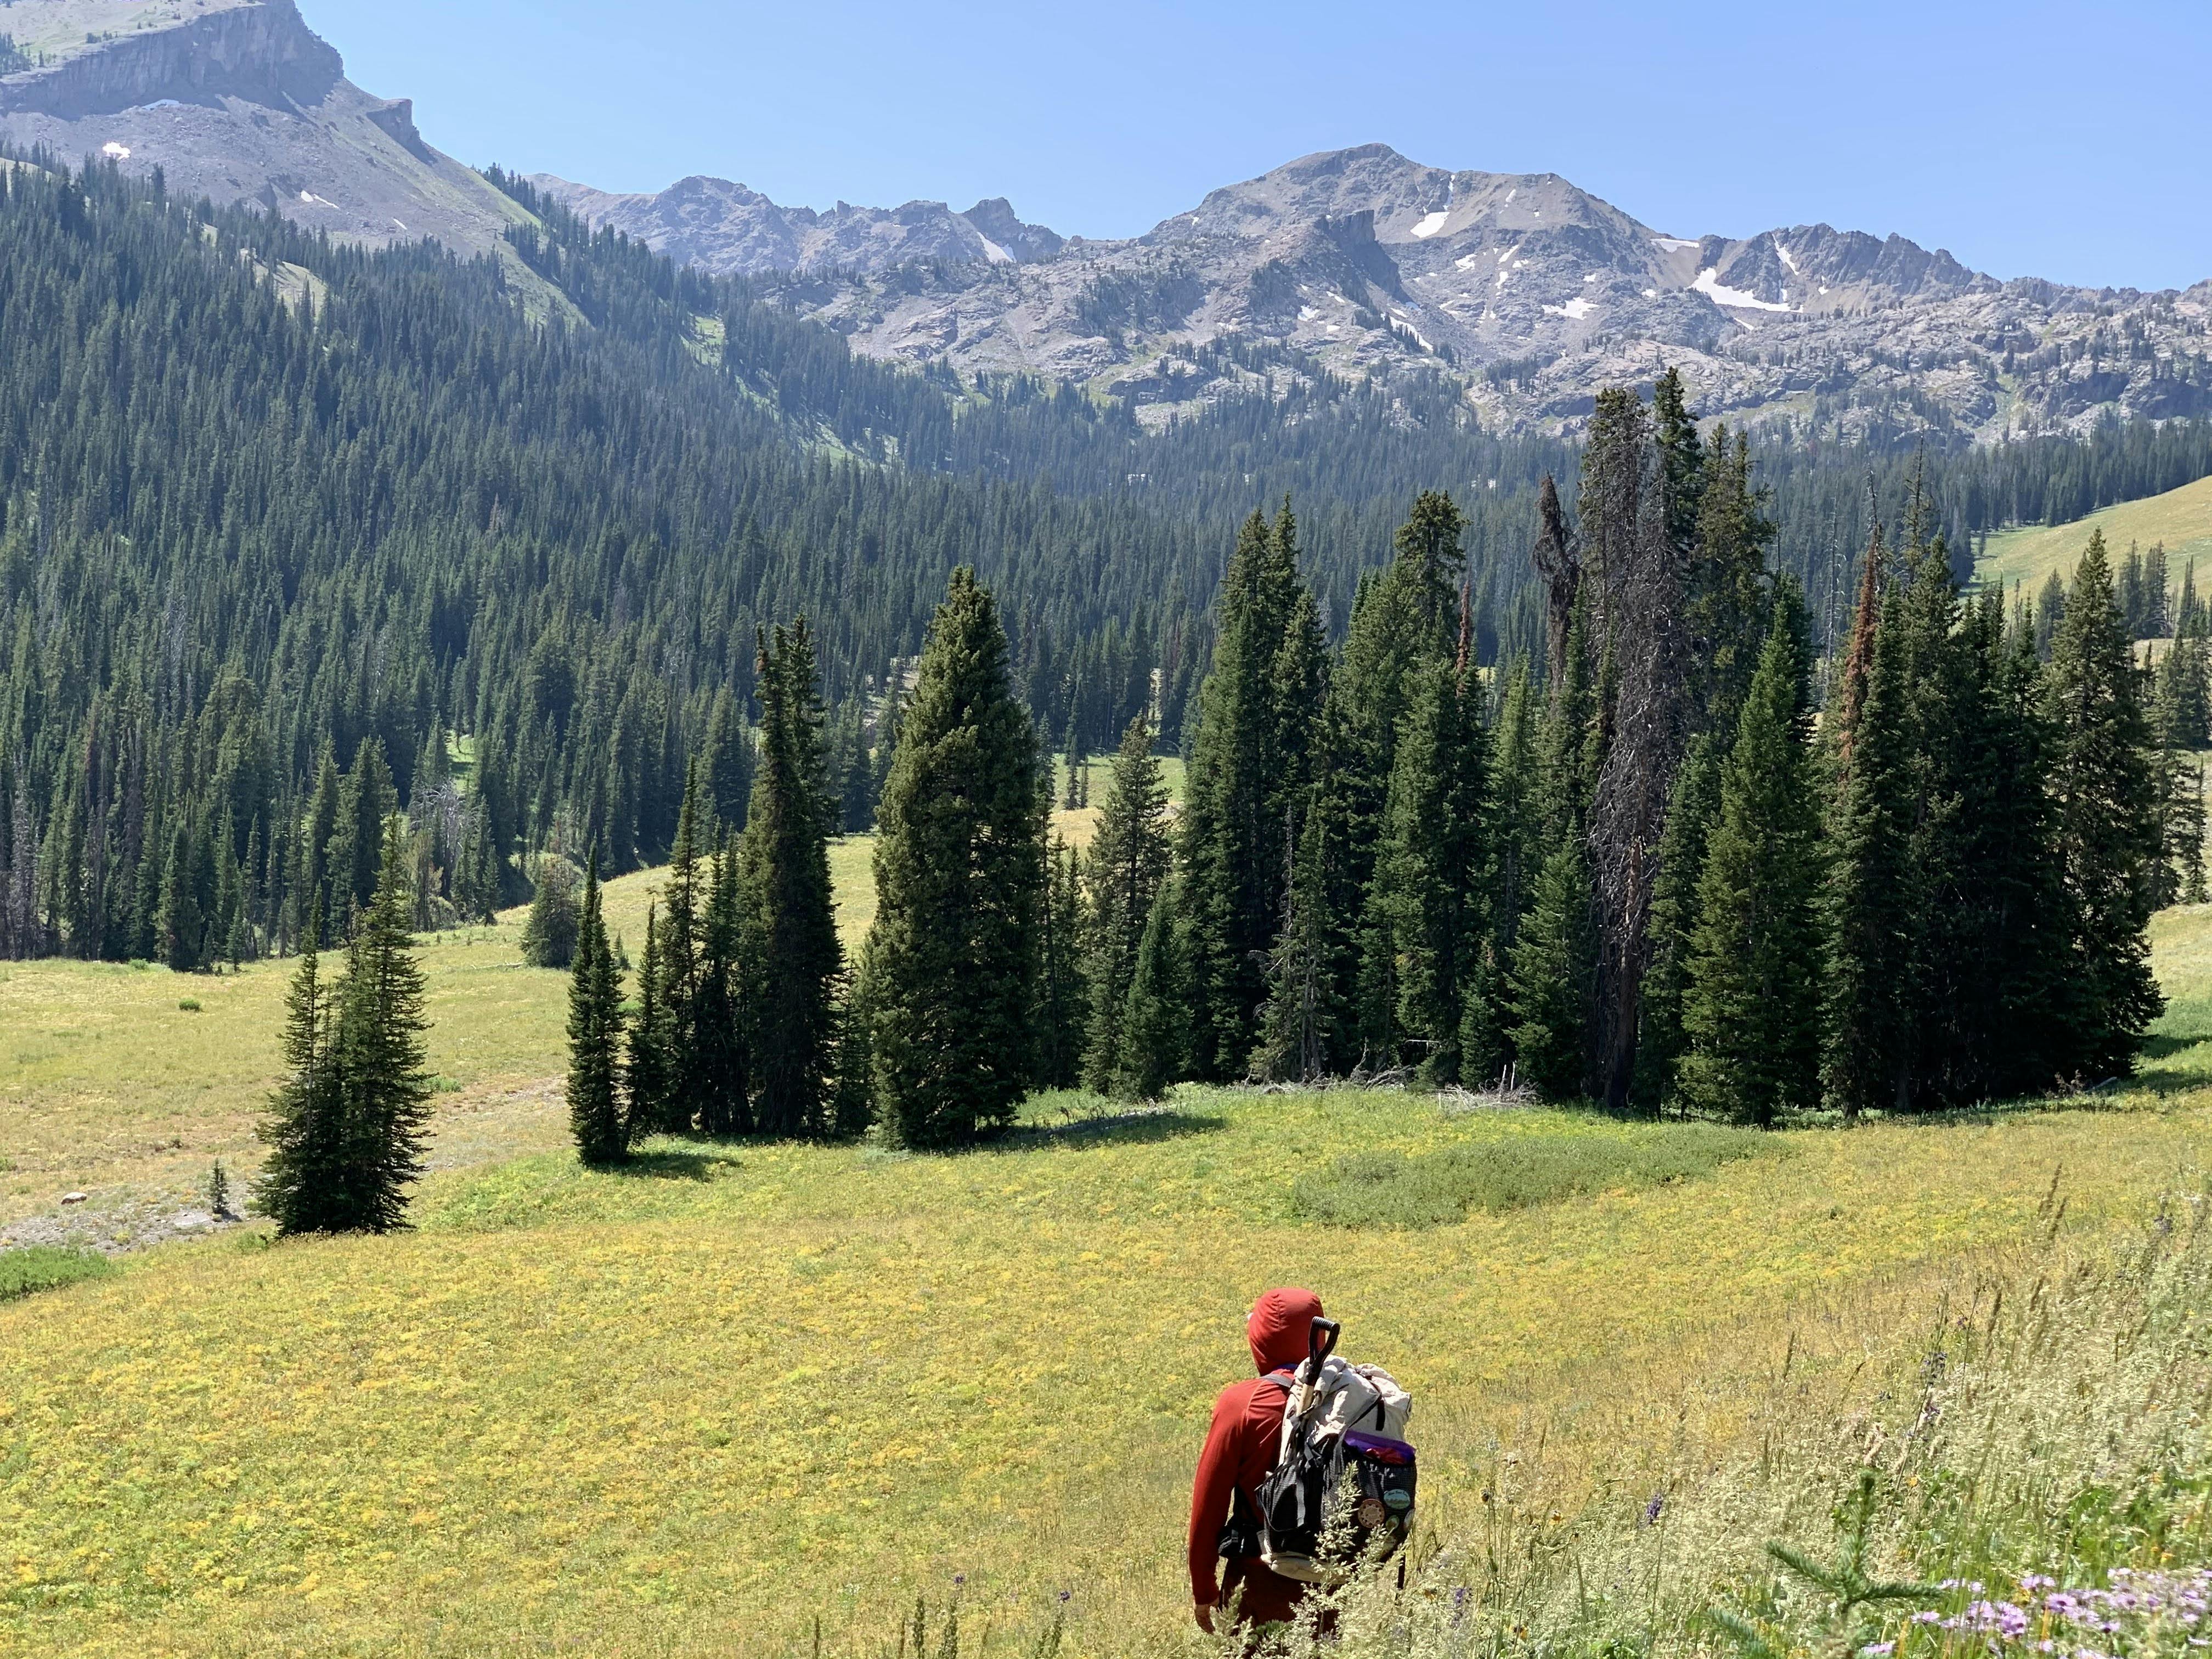 Hiker walking through a grass field with wildflowers and a beautiful mountain range in the background